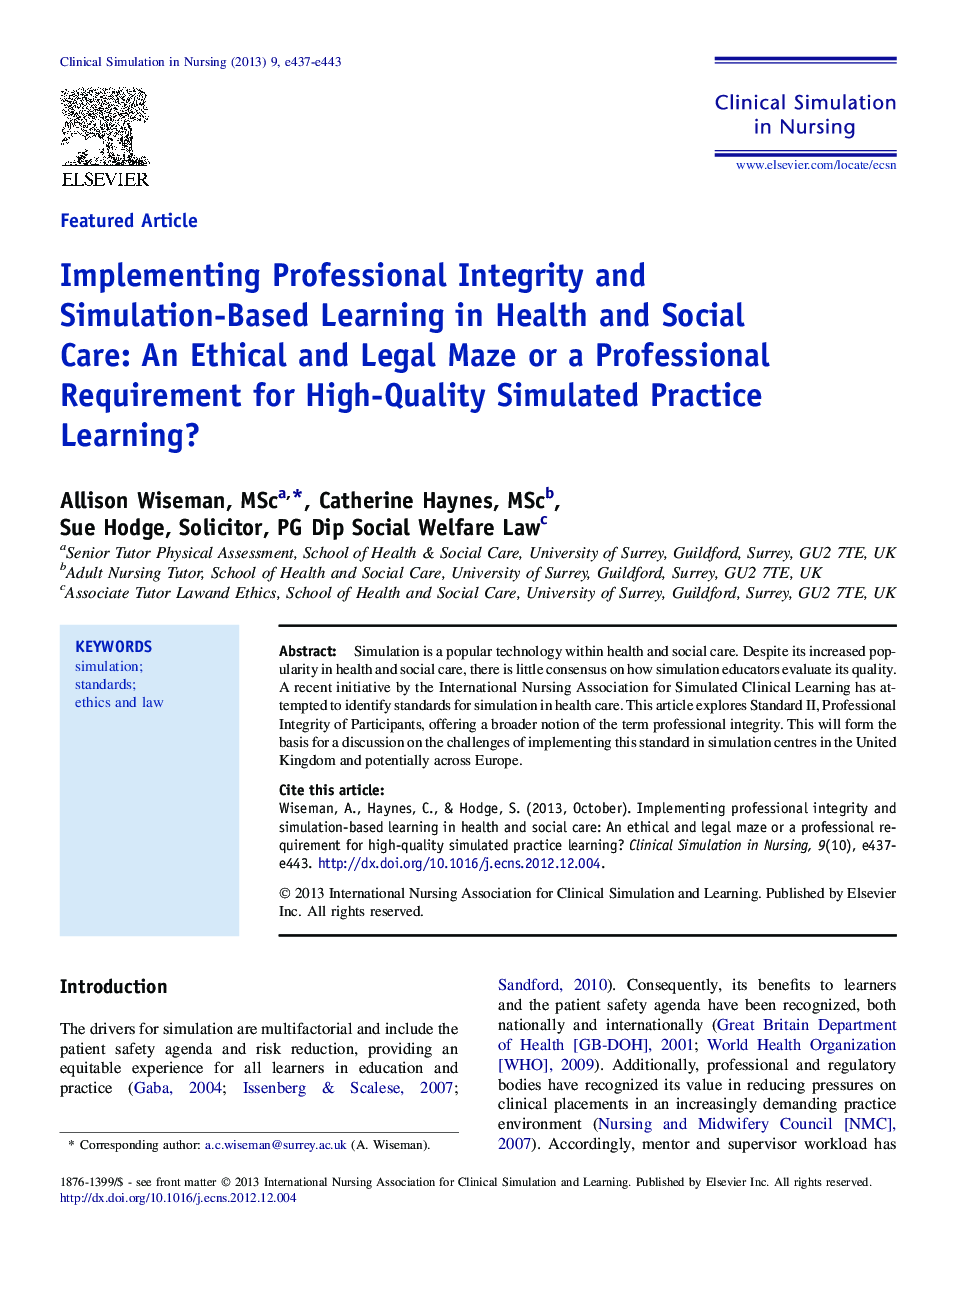 Implementing Professional Integrity and Simulation-Based Learning in Health and Social Care: An Ethical and Legal Maze or a Professional Requirement for High-Quality Simulated Practice Learning?